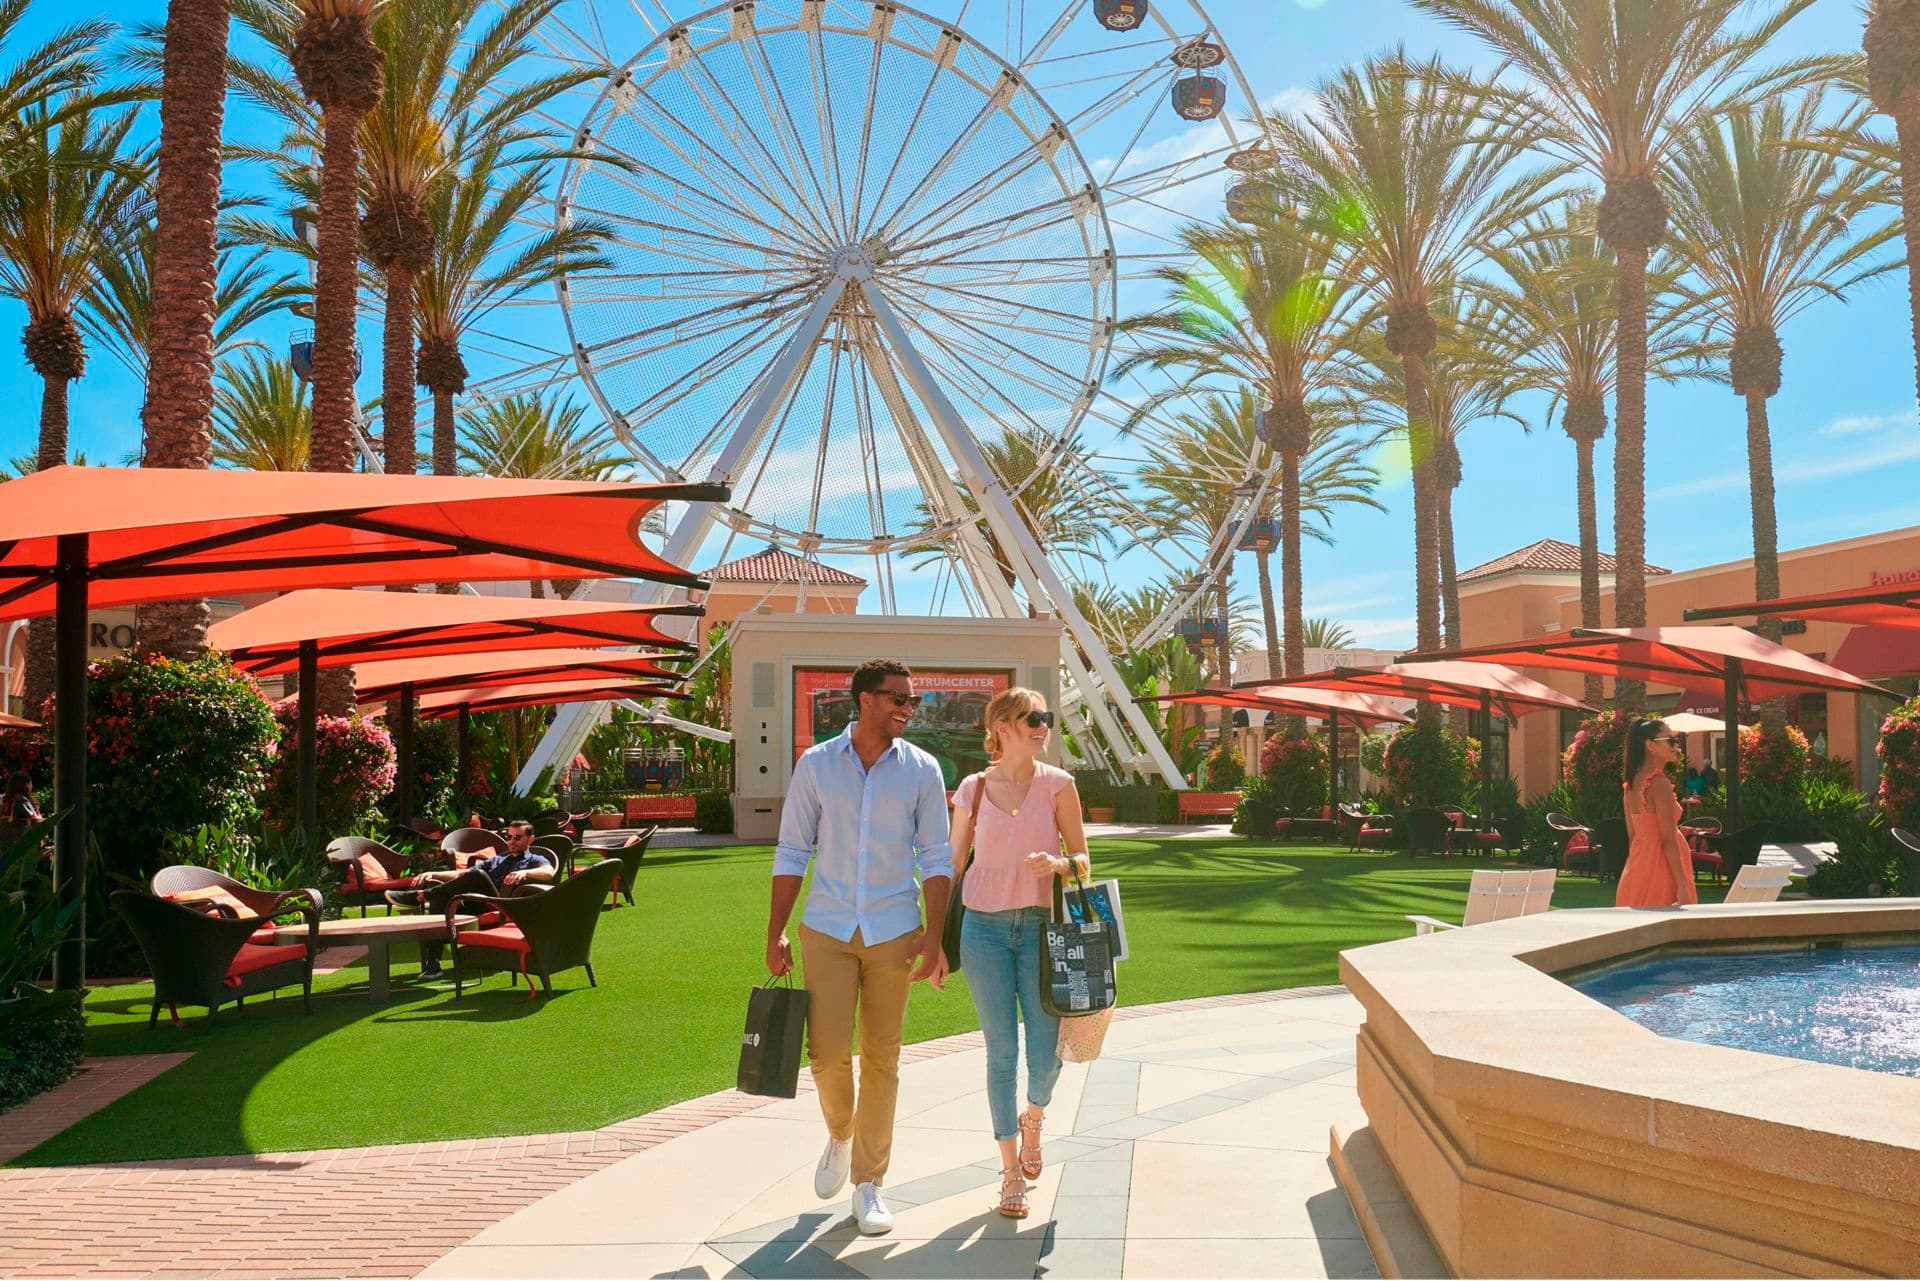 Lifestyle photography of shops at Irvine Spectrum Center.